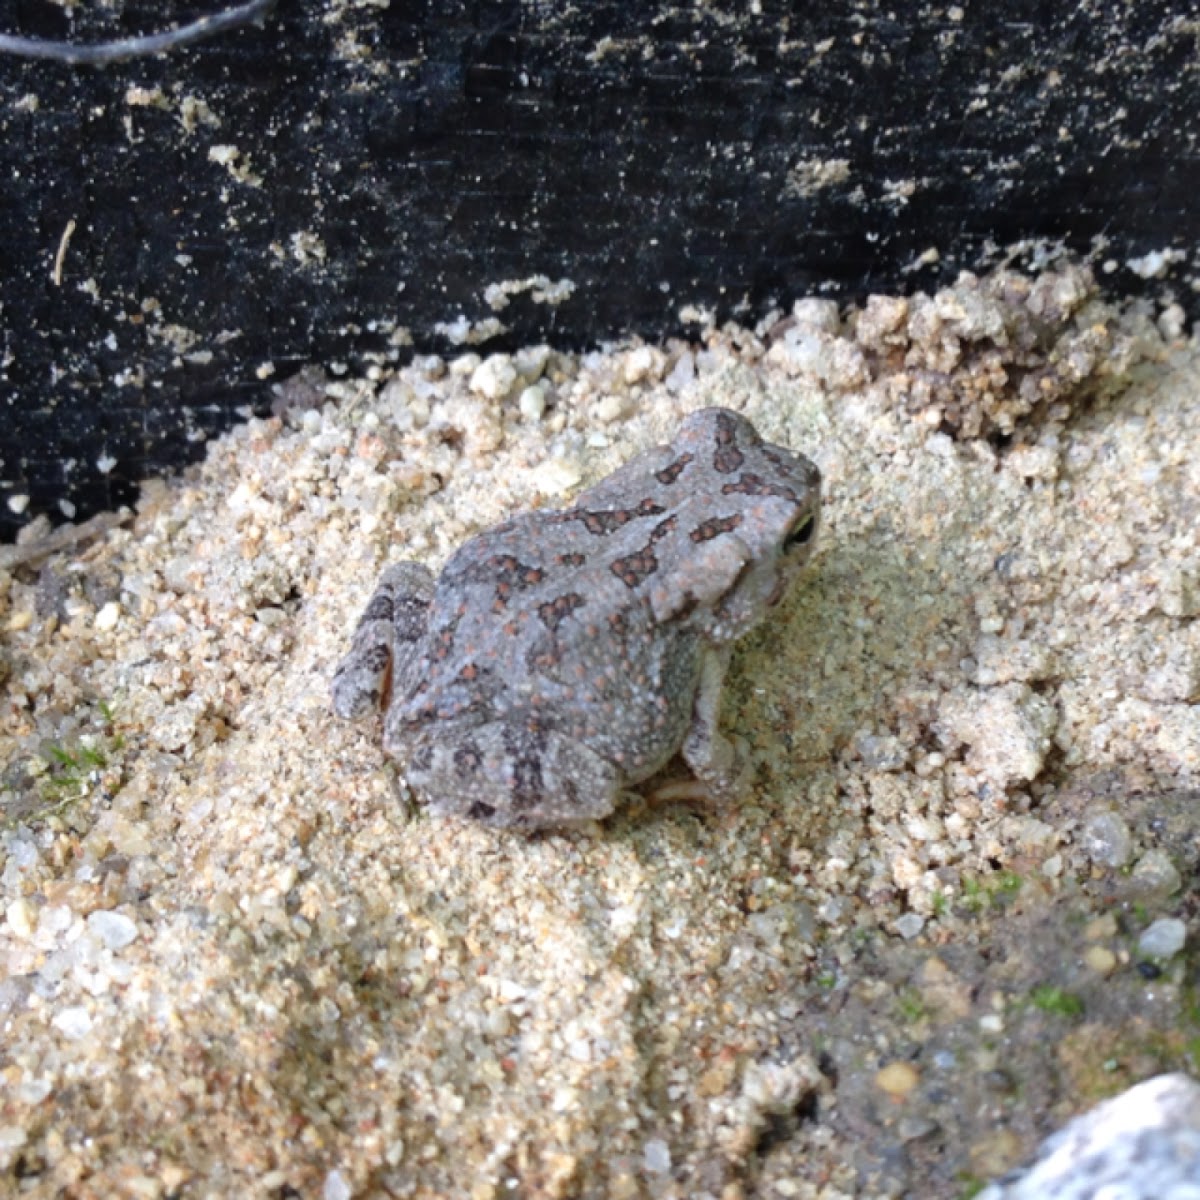 Southern toad